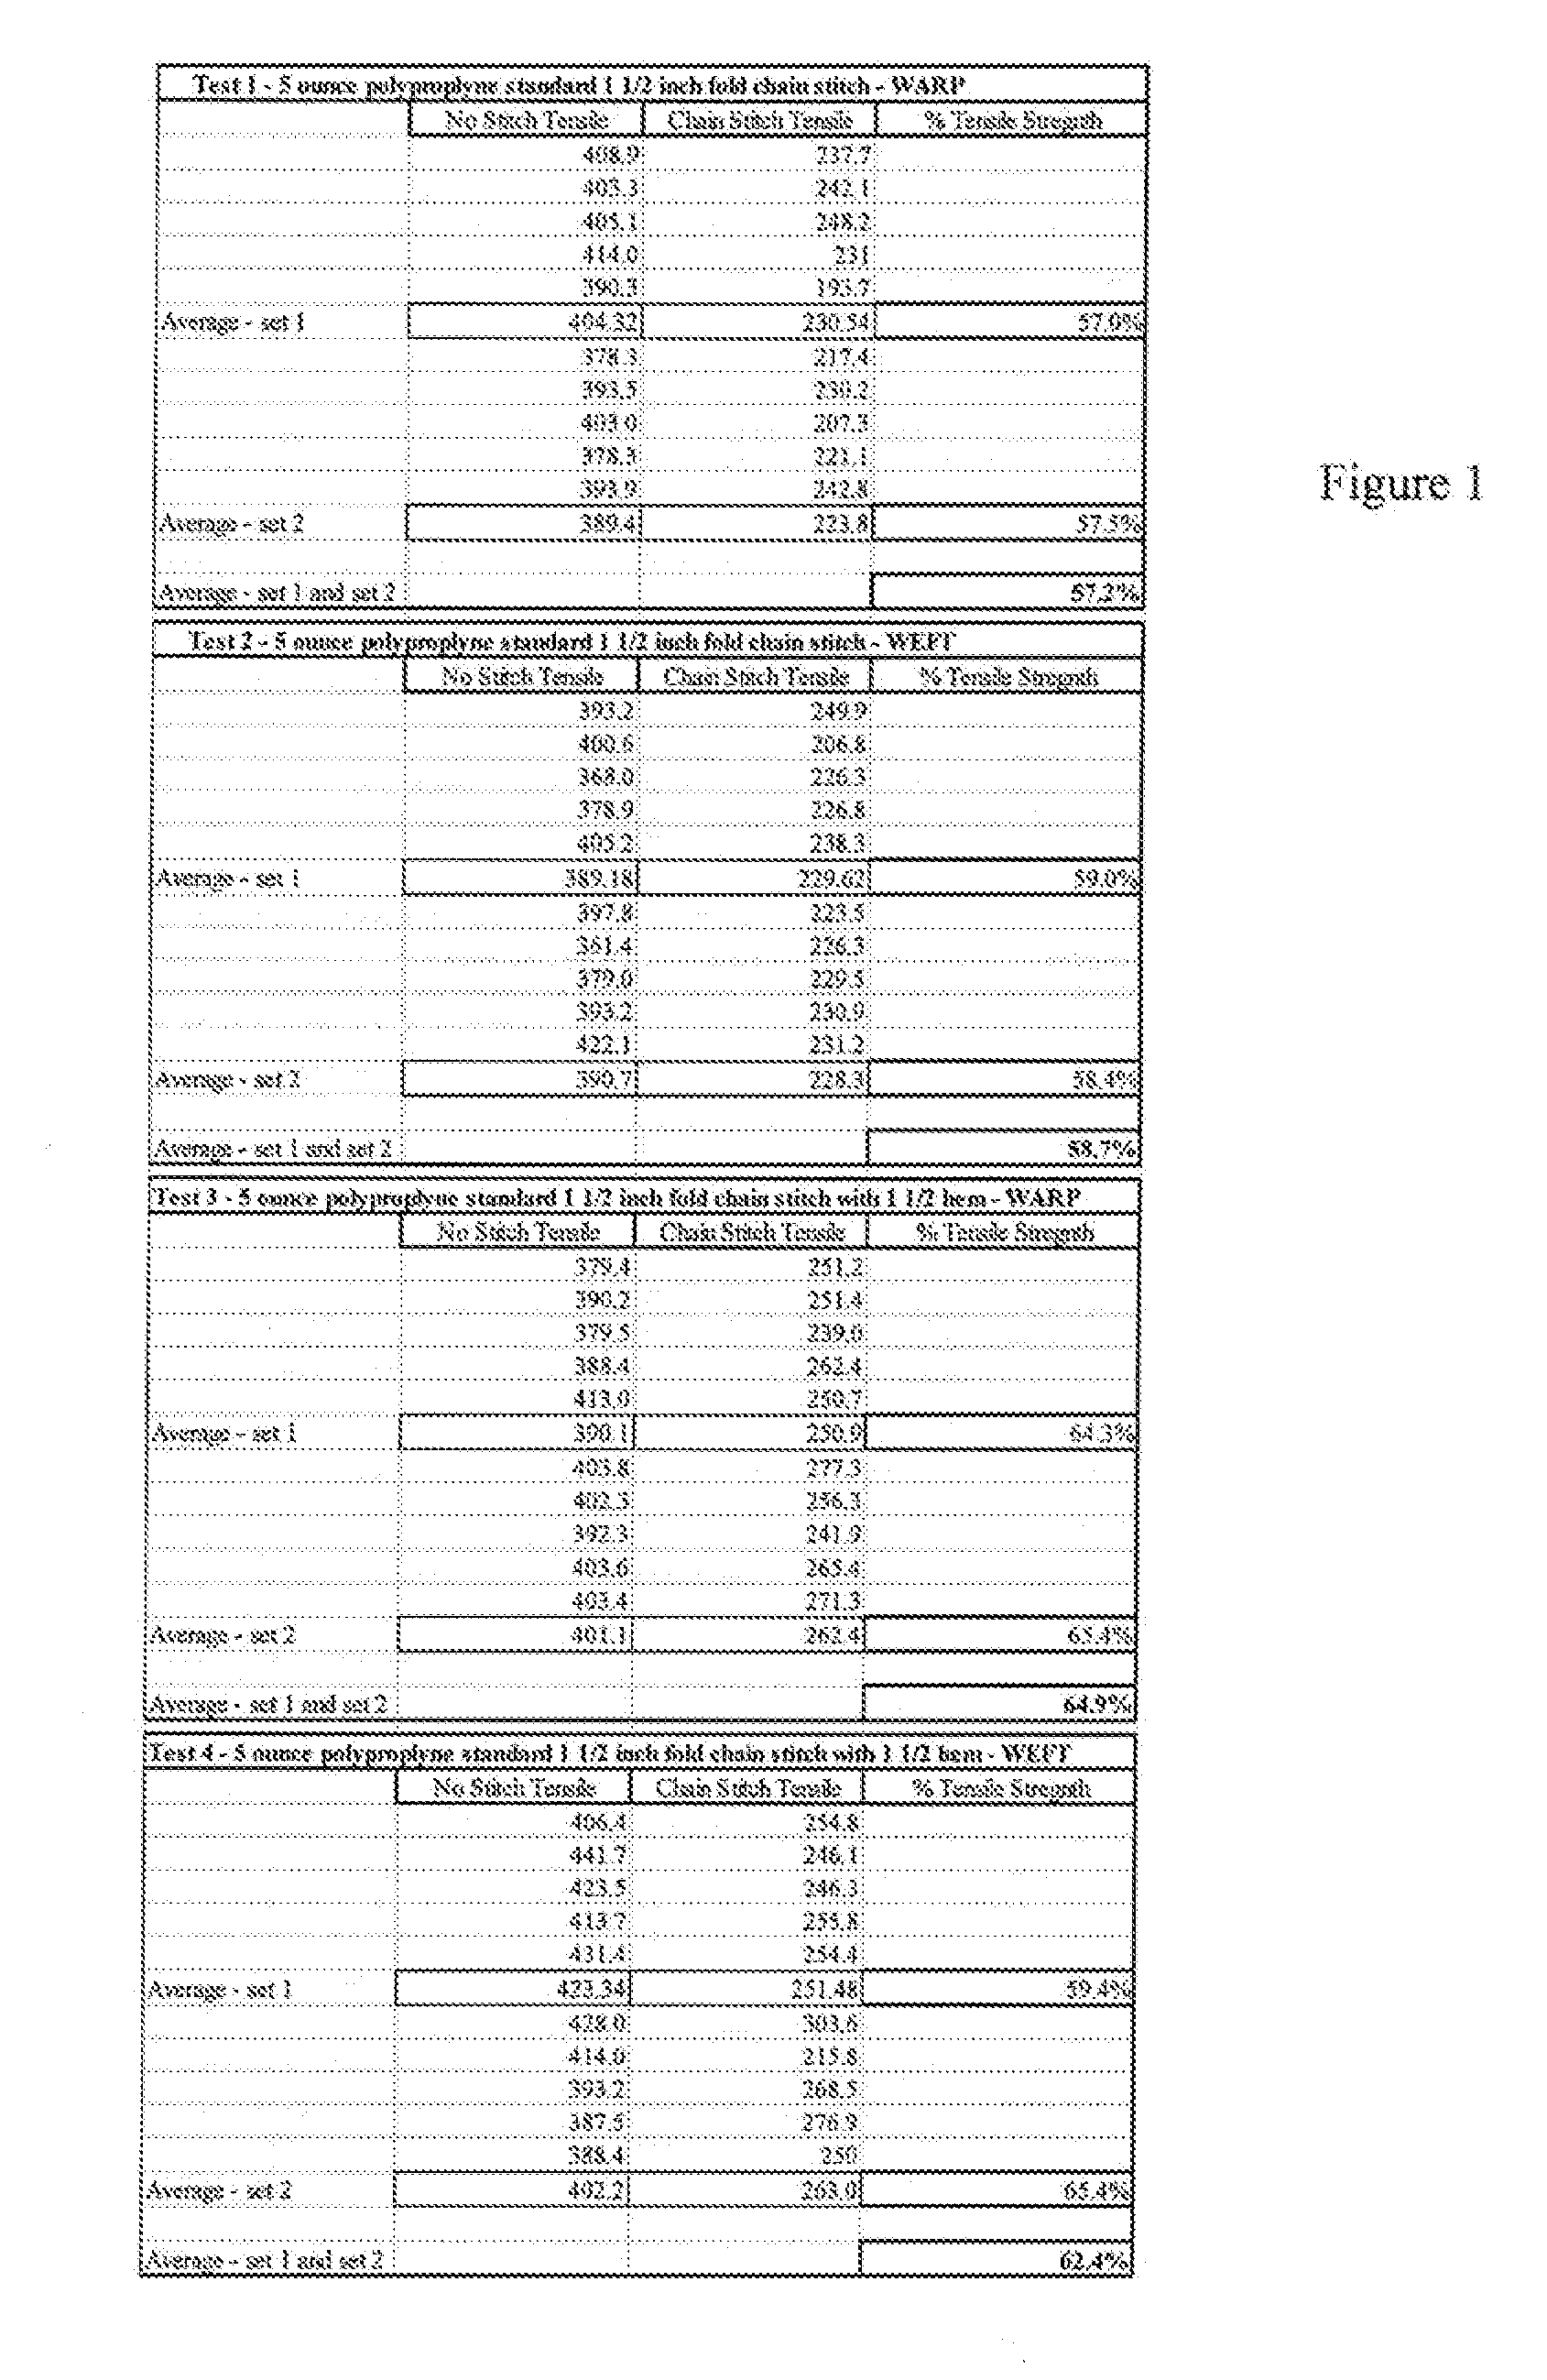 Method of production of fabric bags or containers using heat fused seams